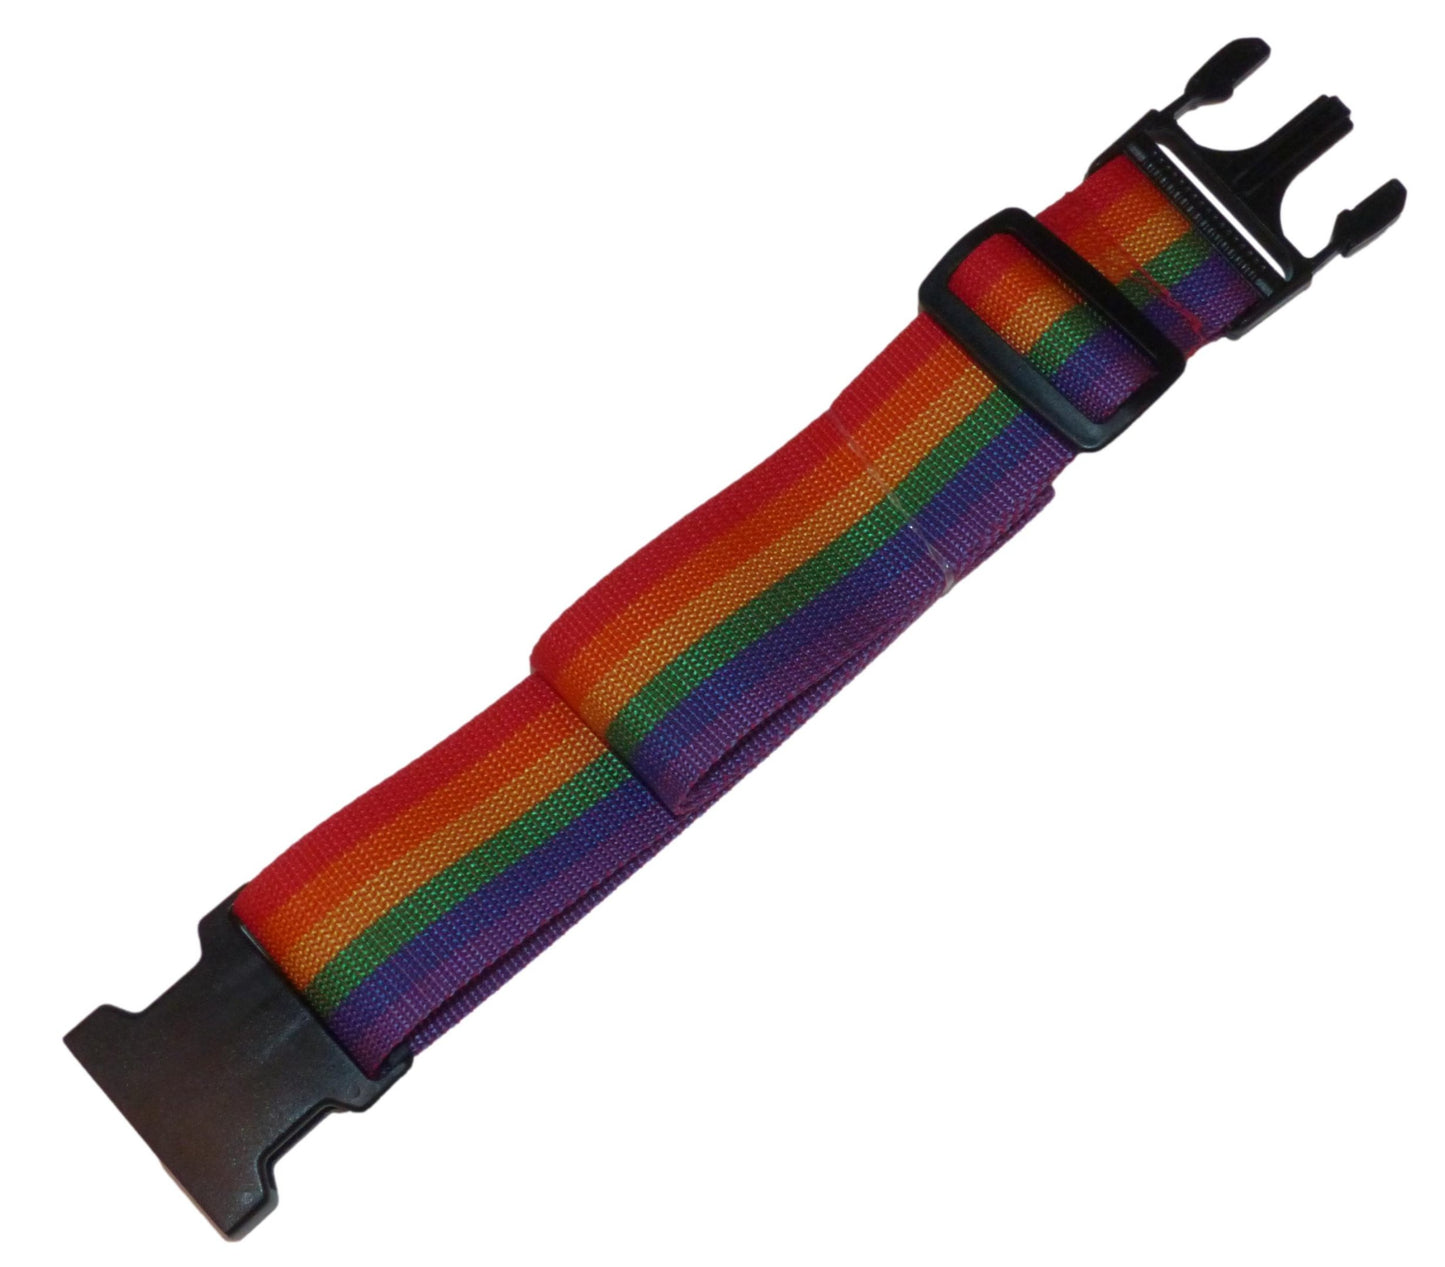 Benristraps 50mm Webbing Strap with Quick Release & Length-Adjusting Buckles in rainbow